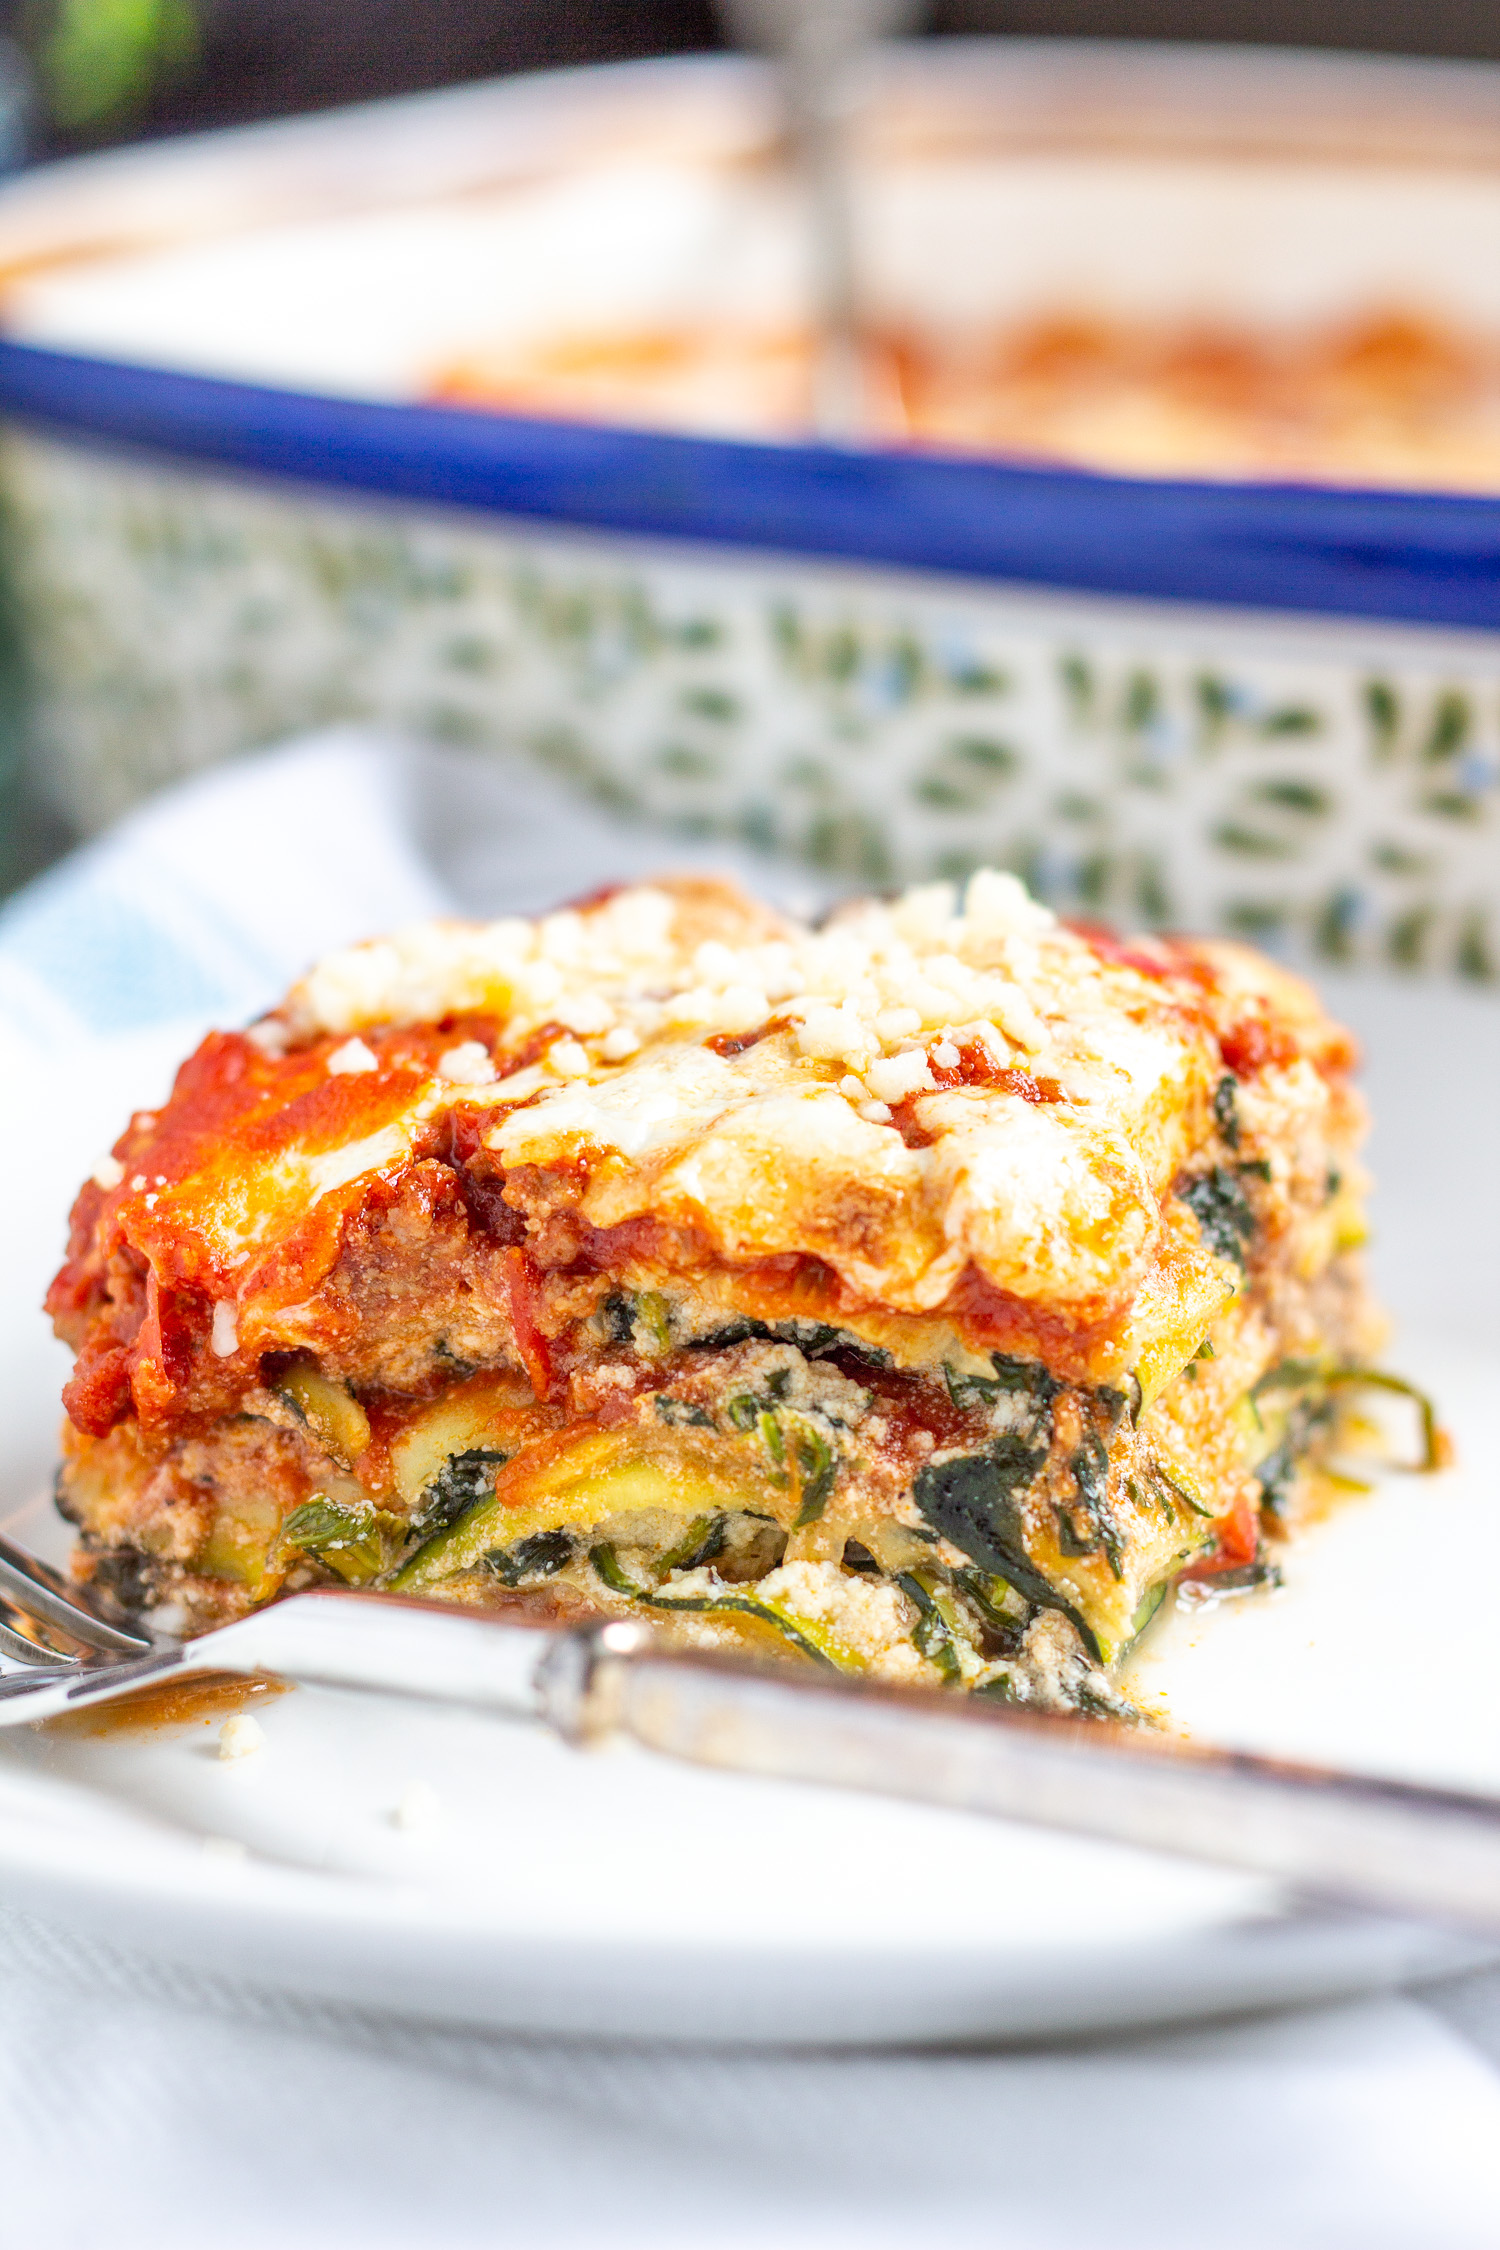 Zucchini Lasagna with Bolognese Sauce - A Meaty Low-Carb Lasagna